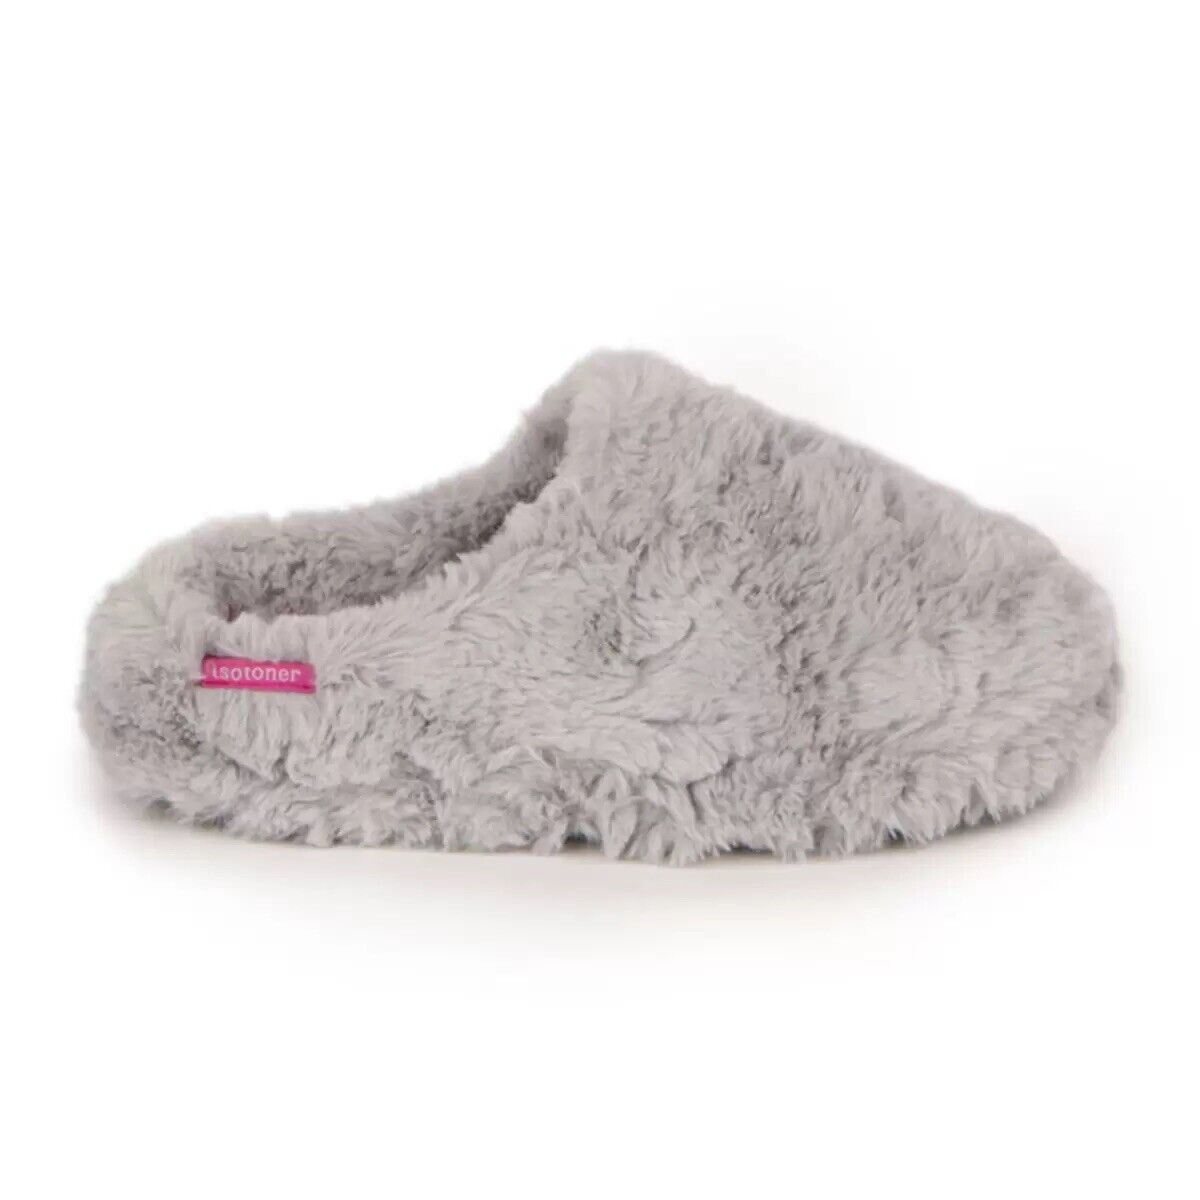 Totes Isotoner Pillow Step Women's Mule Slippers in Silver Grey, Large